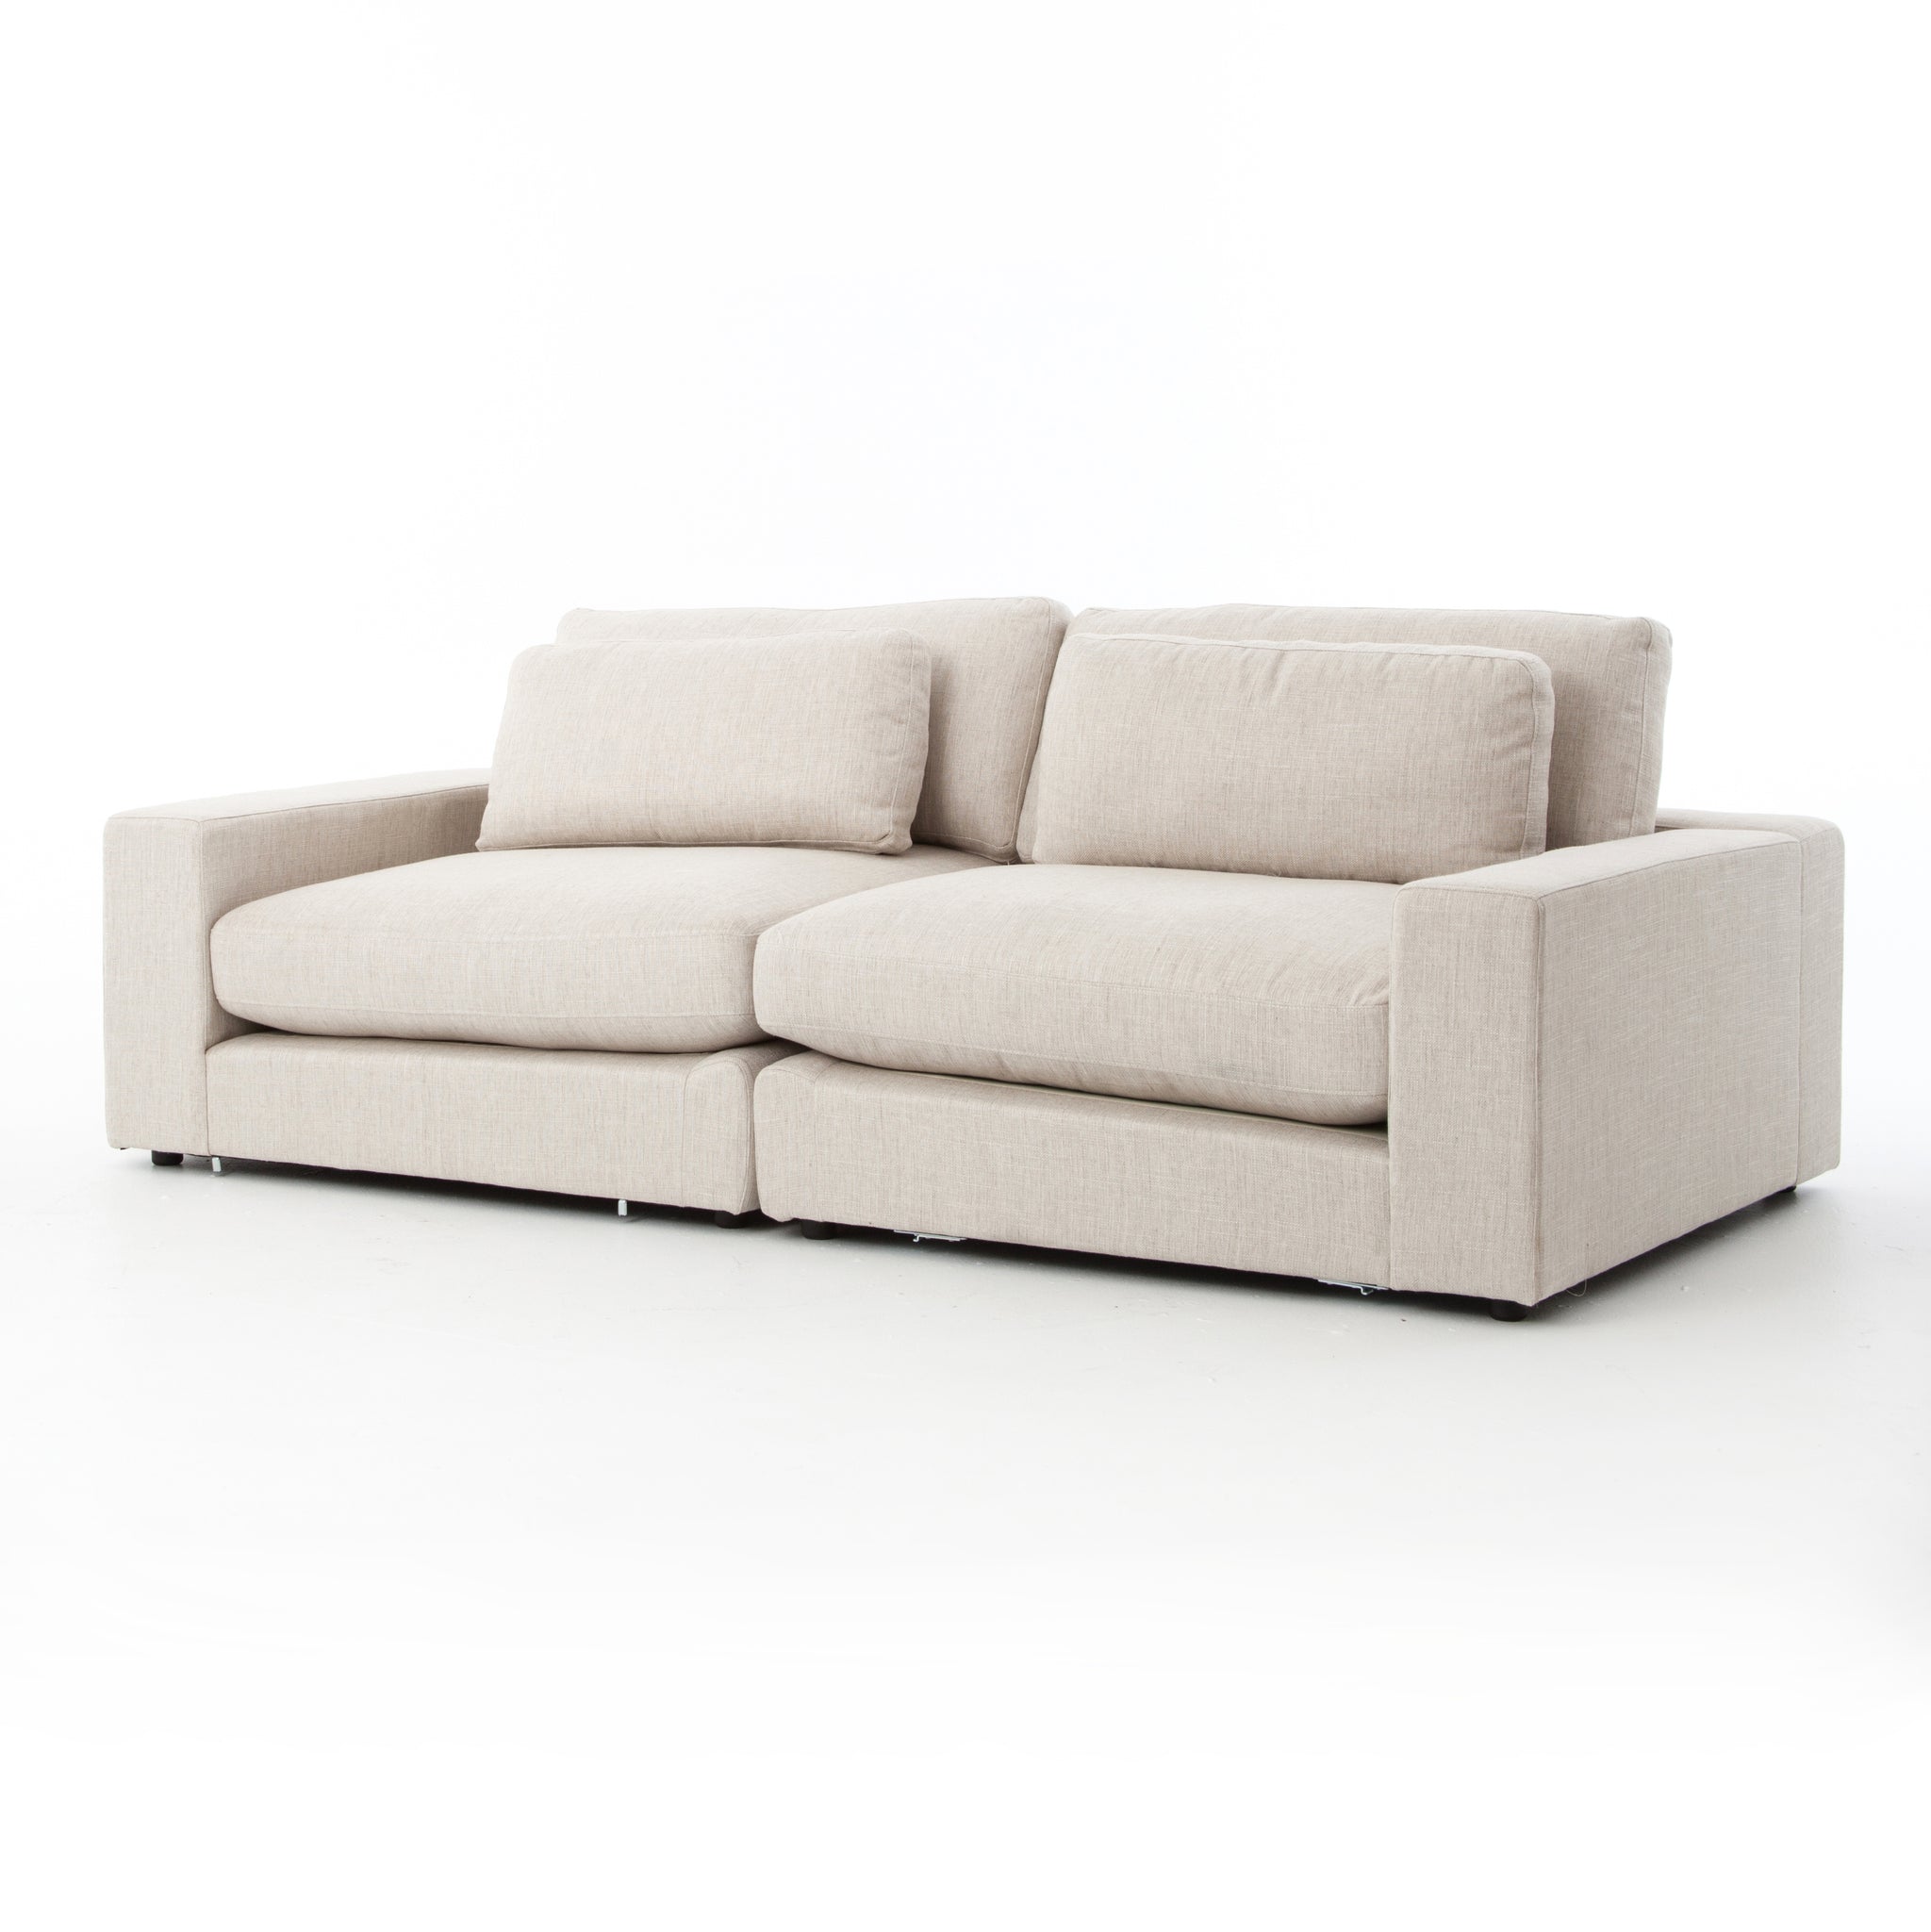 Bloor Sectional Right Arm Facing - Essence Natural - Scenario Home